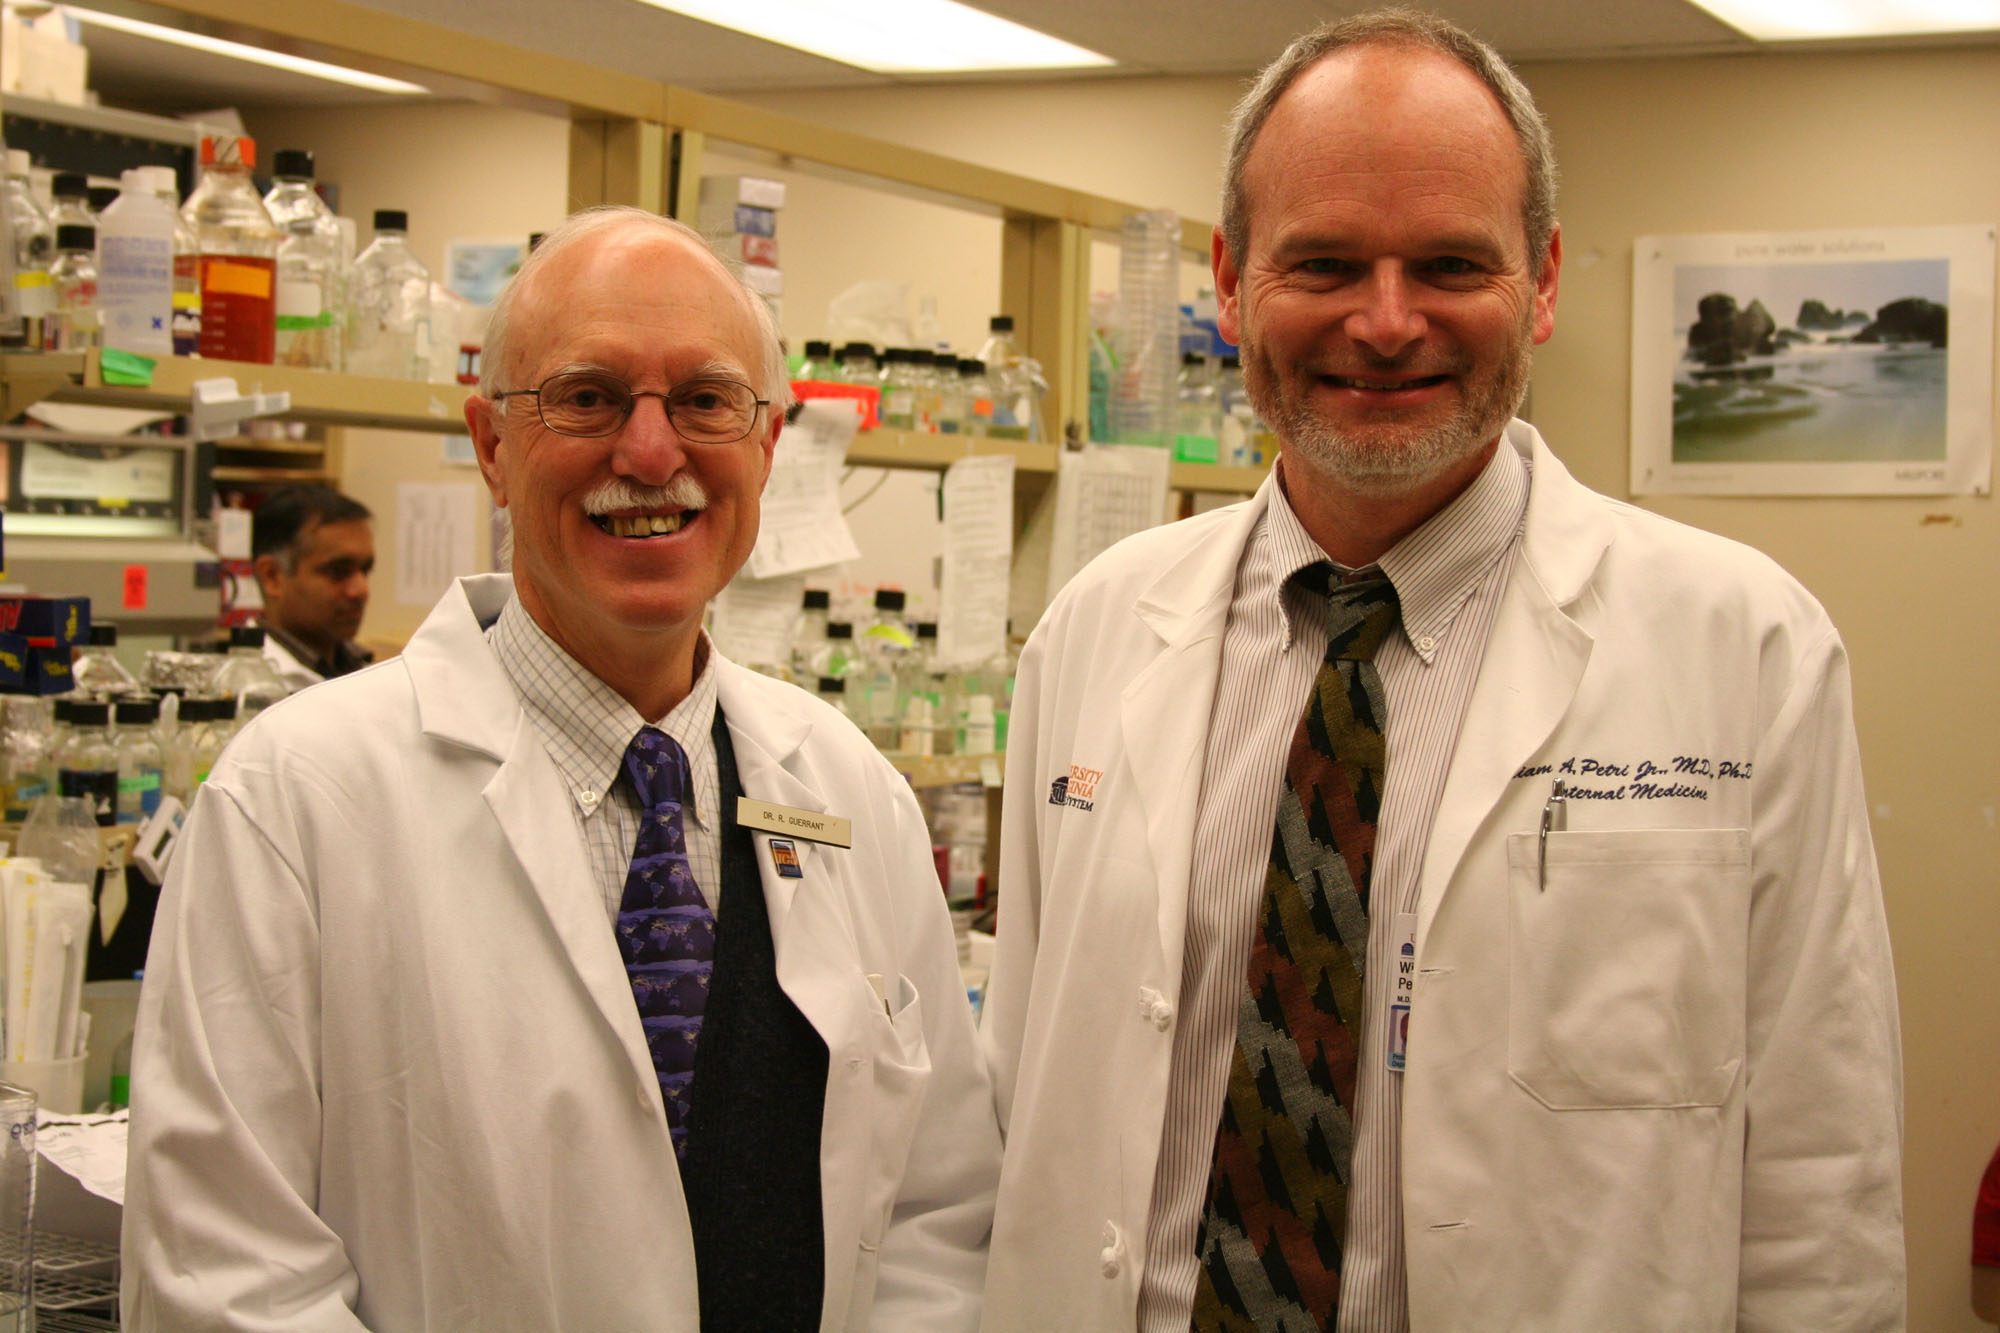 Dr. Richard Guerrant (left) and Dr. William Petri, Jr. stand next to each other smiling at the camere